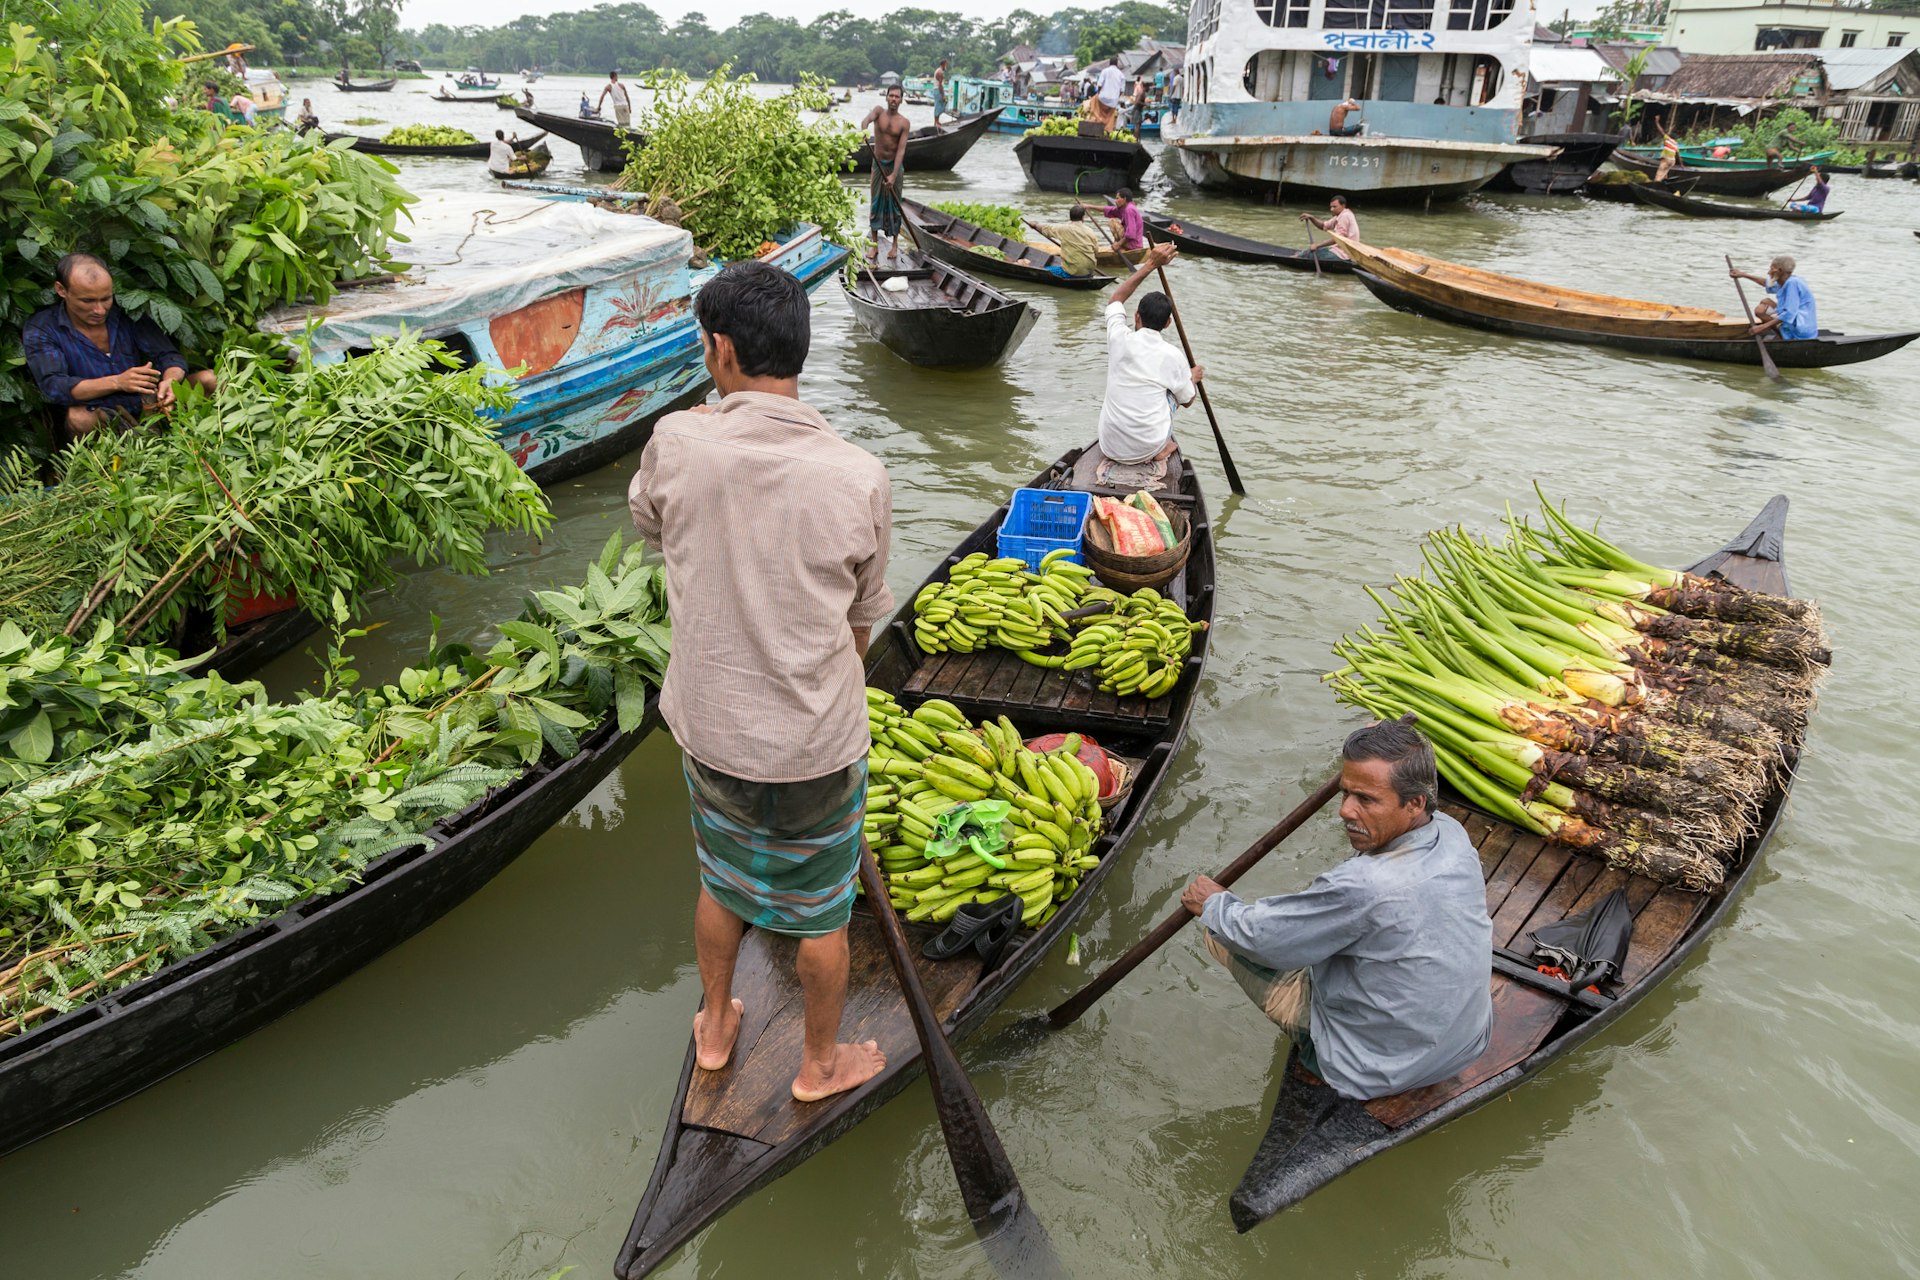 Fruit and veg for sale in the floating market at Barisal © RubyRascal/Getty Images